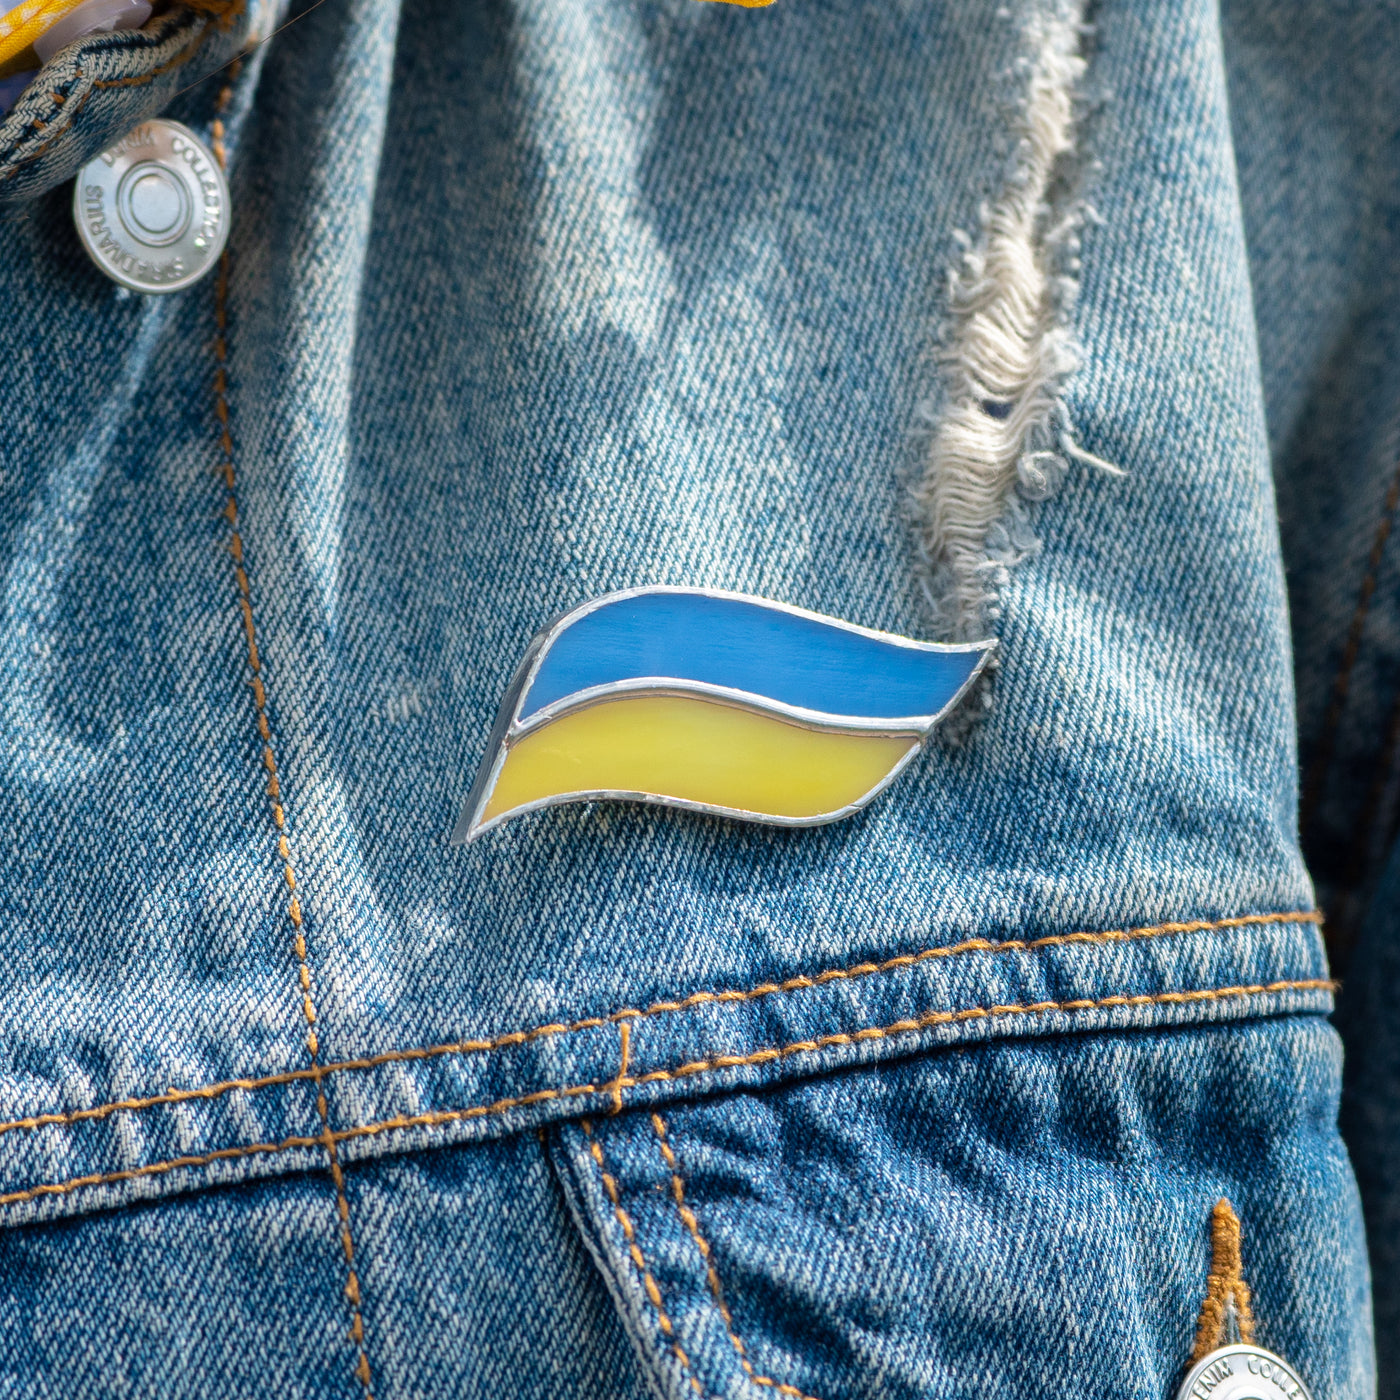 Ukrainian flag brooch of stained glass